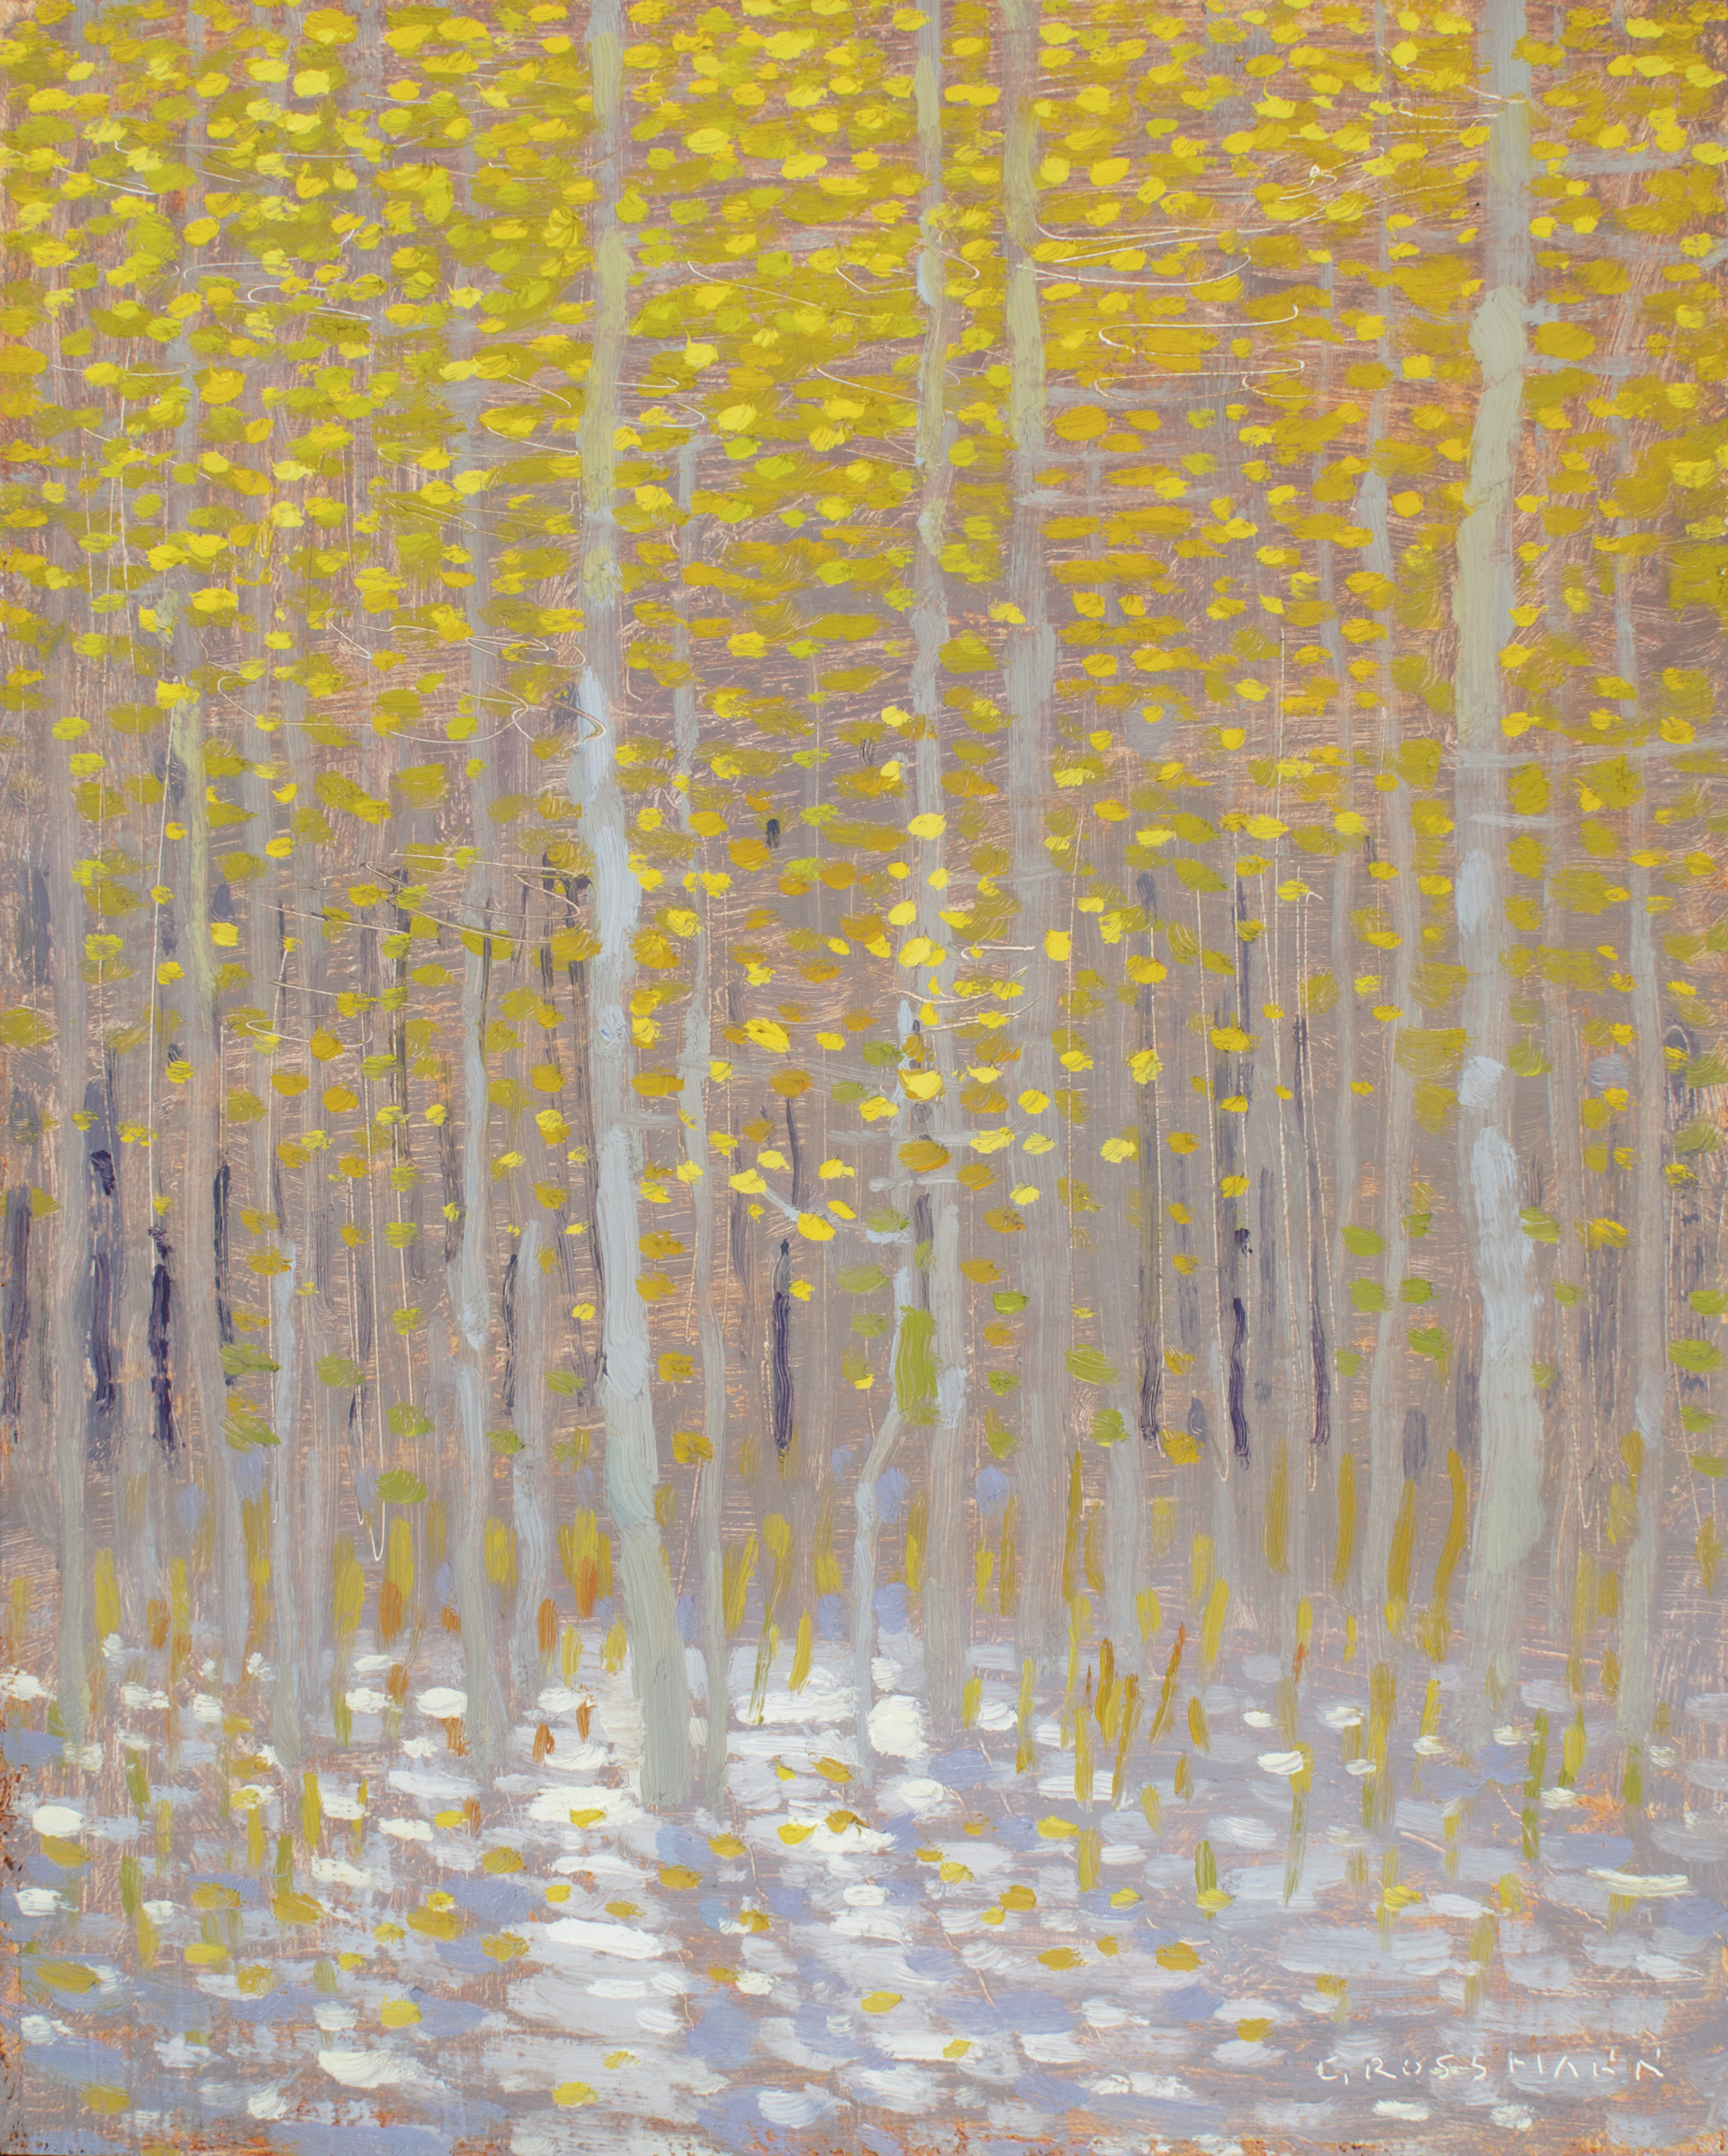 Snow and Sunlit Leaves by David Grossmann